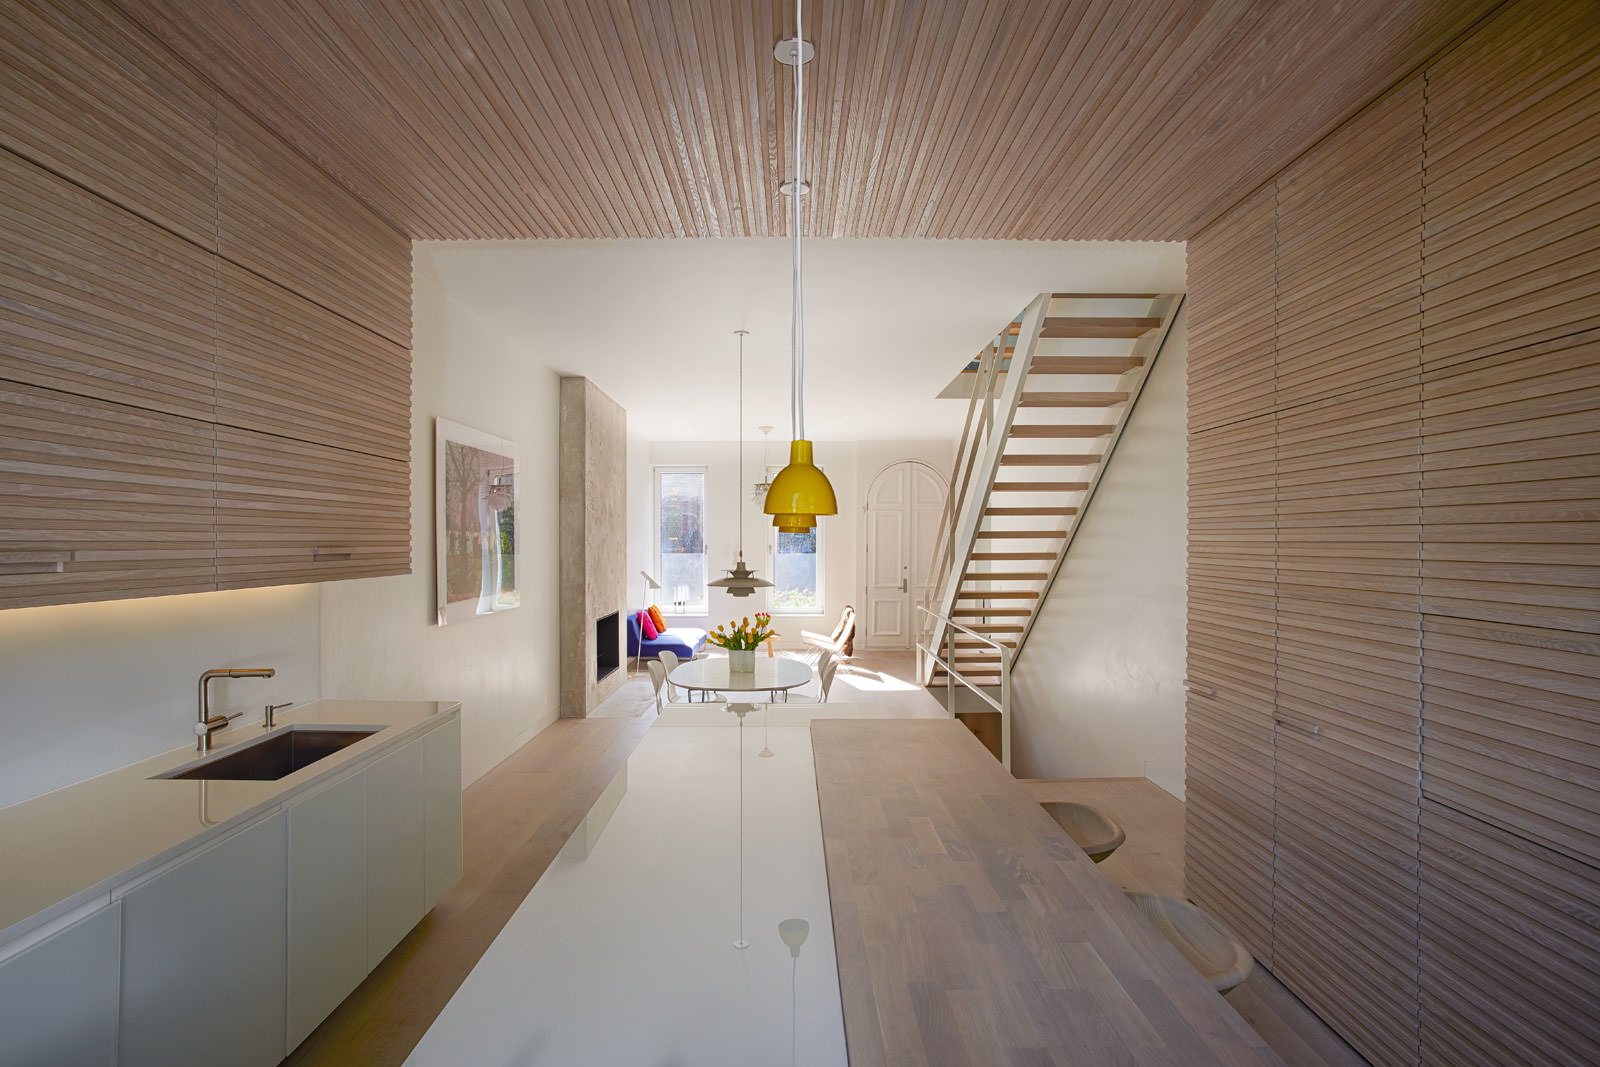 Gorgeous slatted wood kitchen in Park Slope passive house design and renovation.